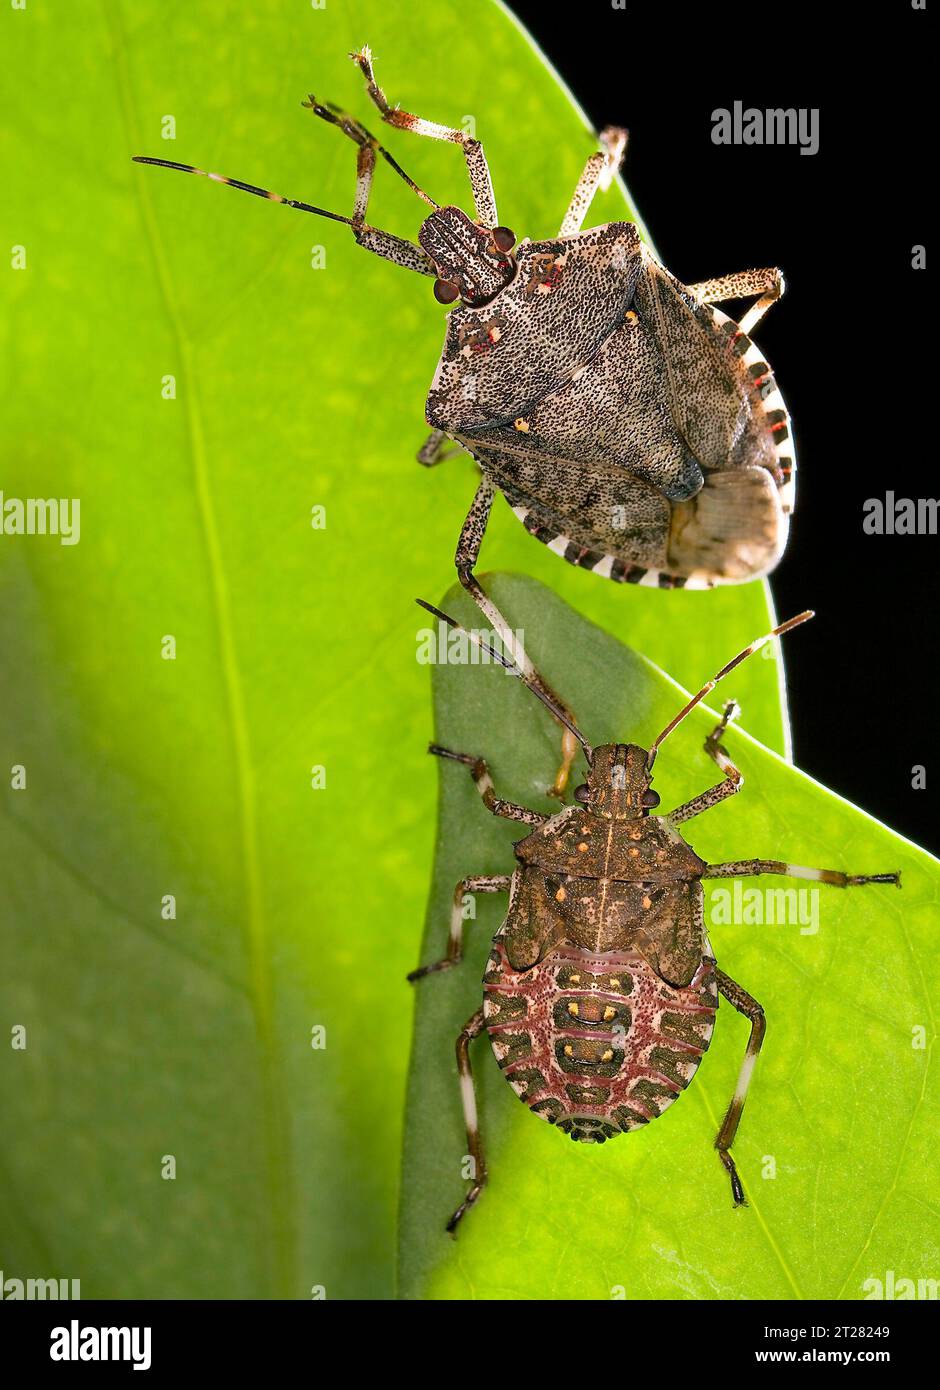 The brown marmorated stink bug (Halyomorpha halys), a winged invader from Asia that is eating crops and infesting U.S. homes, is spreading and is expected to continue to do so. Adult (top) and fifth-instar nymph (bottom). Stock Photo